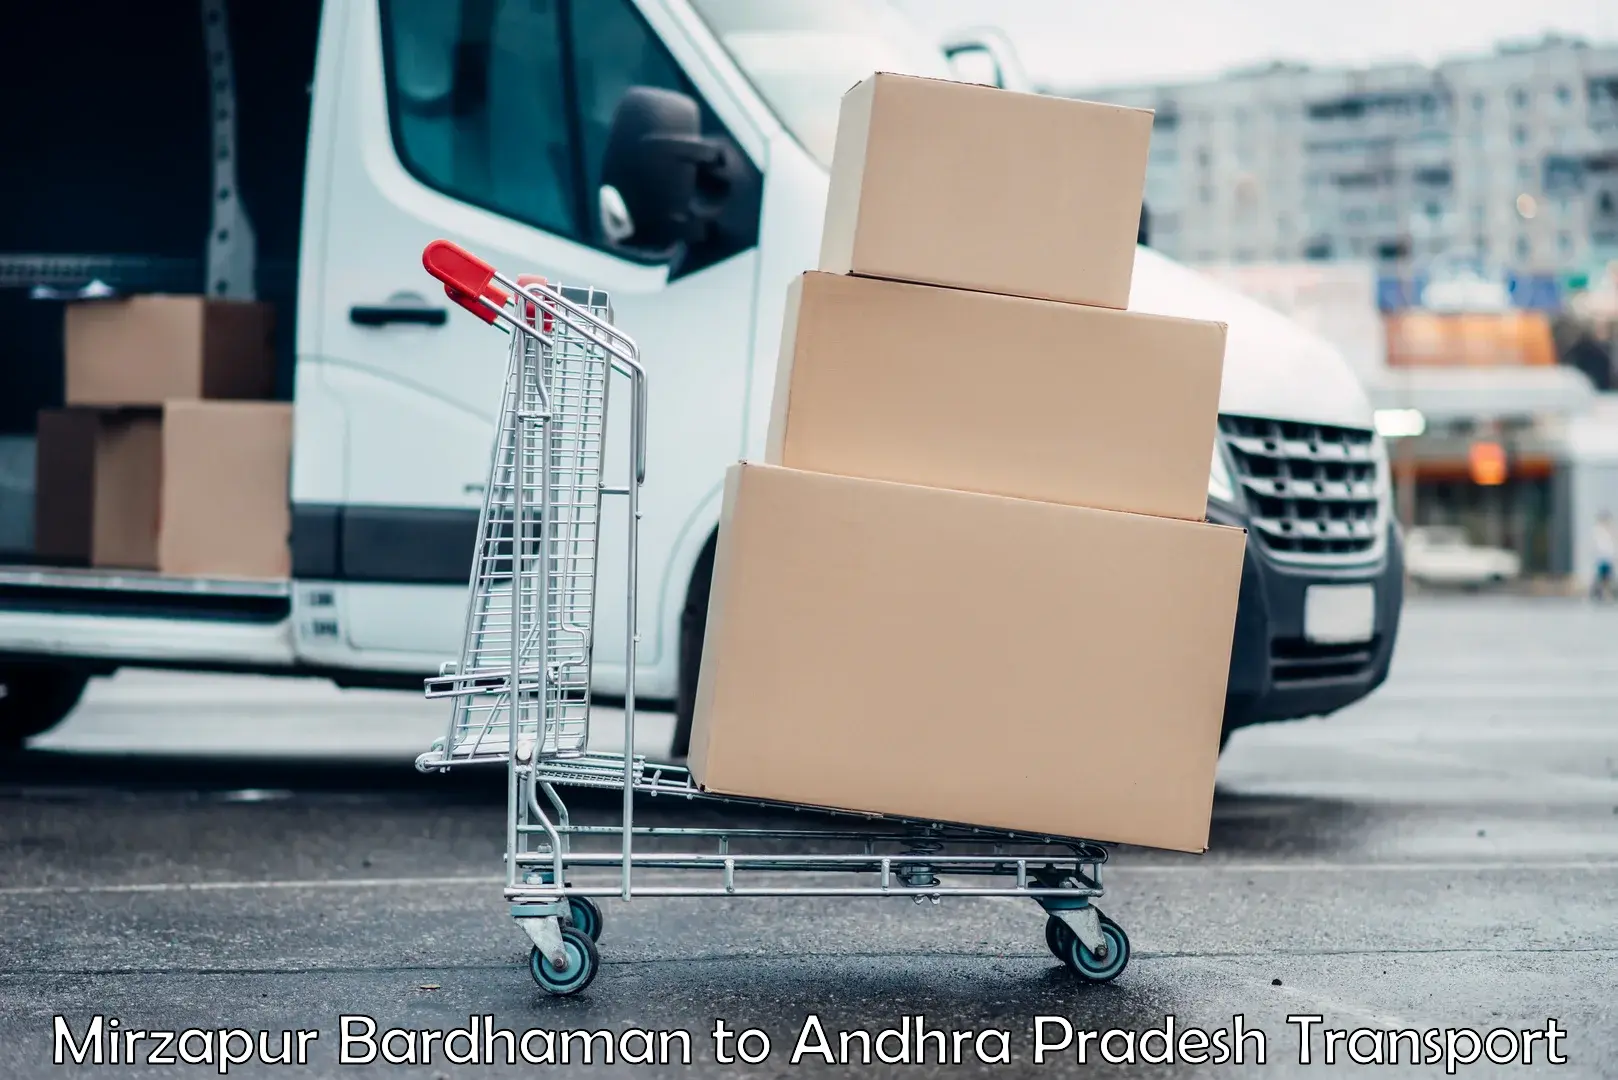 Parcel transport services in Mirzapur Bardhaman to Bhimadole